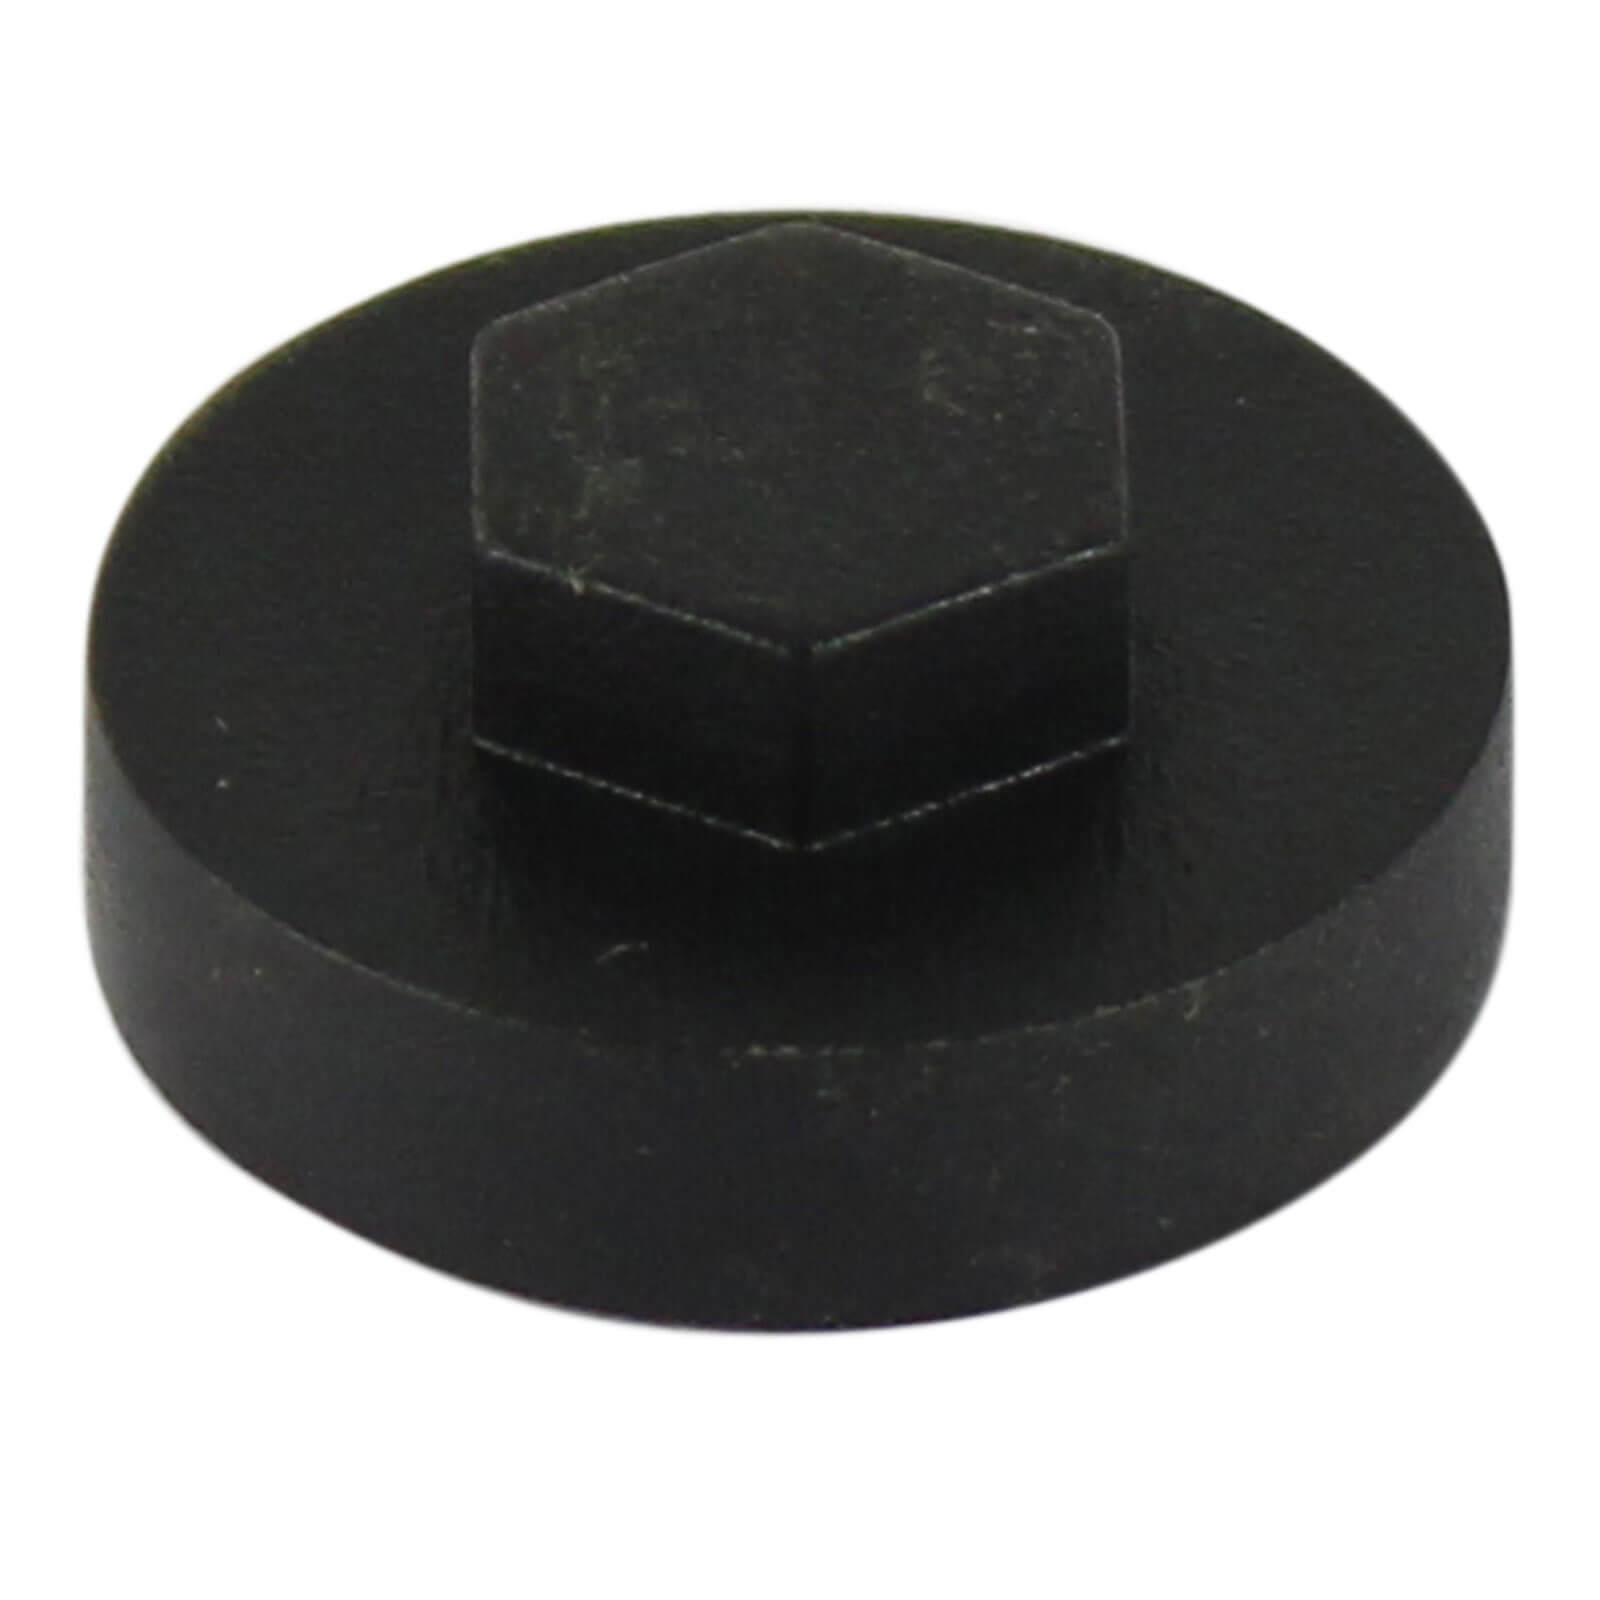 Image of Colour Match Hexagon Screw Cover Cap 5/16" x 19mm Black Pack of 1000